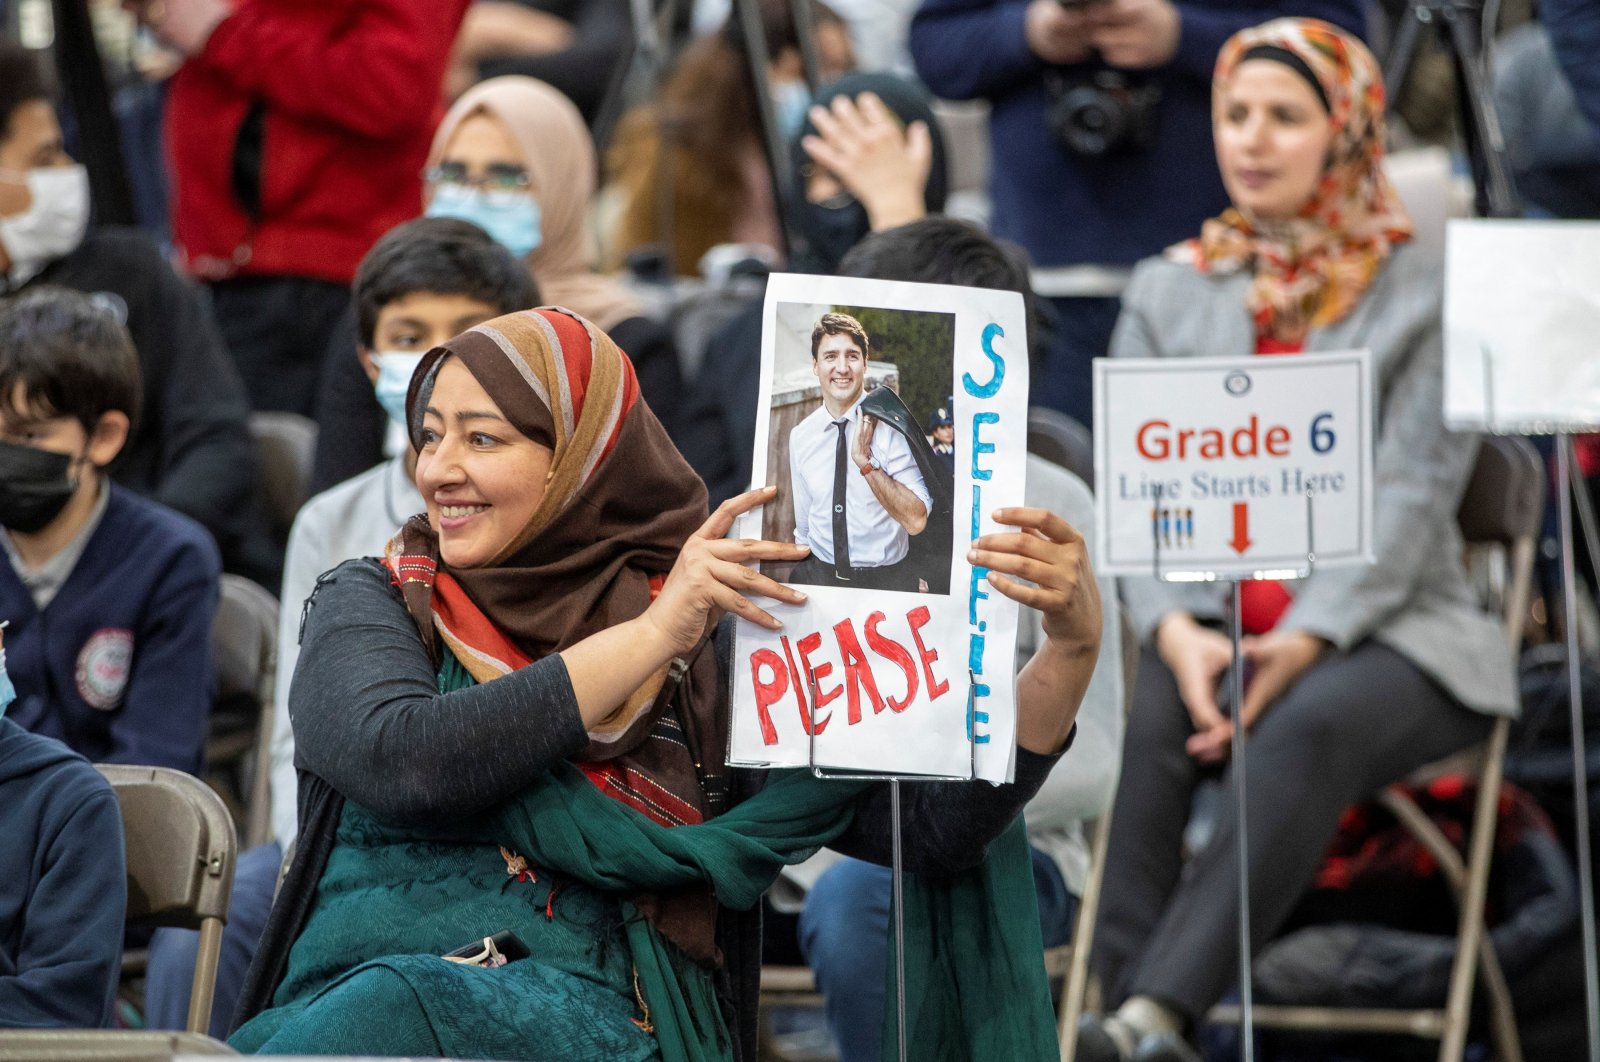 A woman waits with a sign for Canadian Prime Minister Justin Trudeau as he meets members of the Muslim community during a visit to the International School of Cambridge, Ontario, Canada, April 20, 2022. (Reuters Photo)